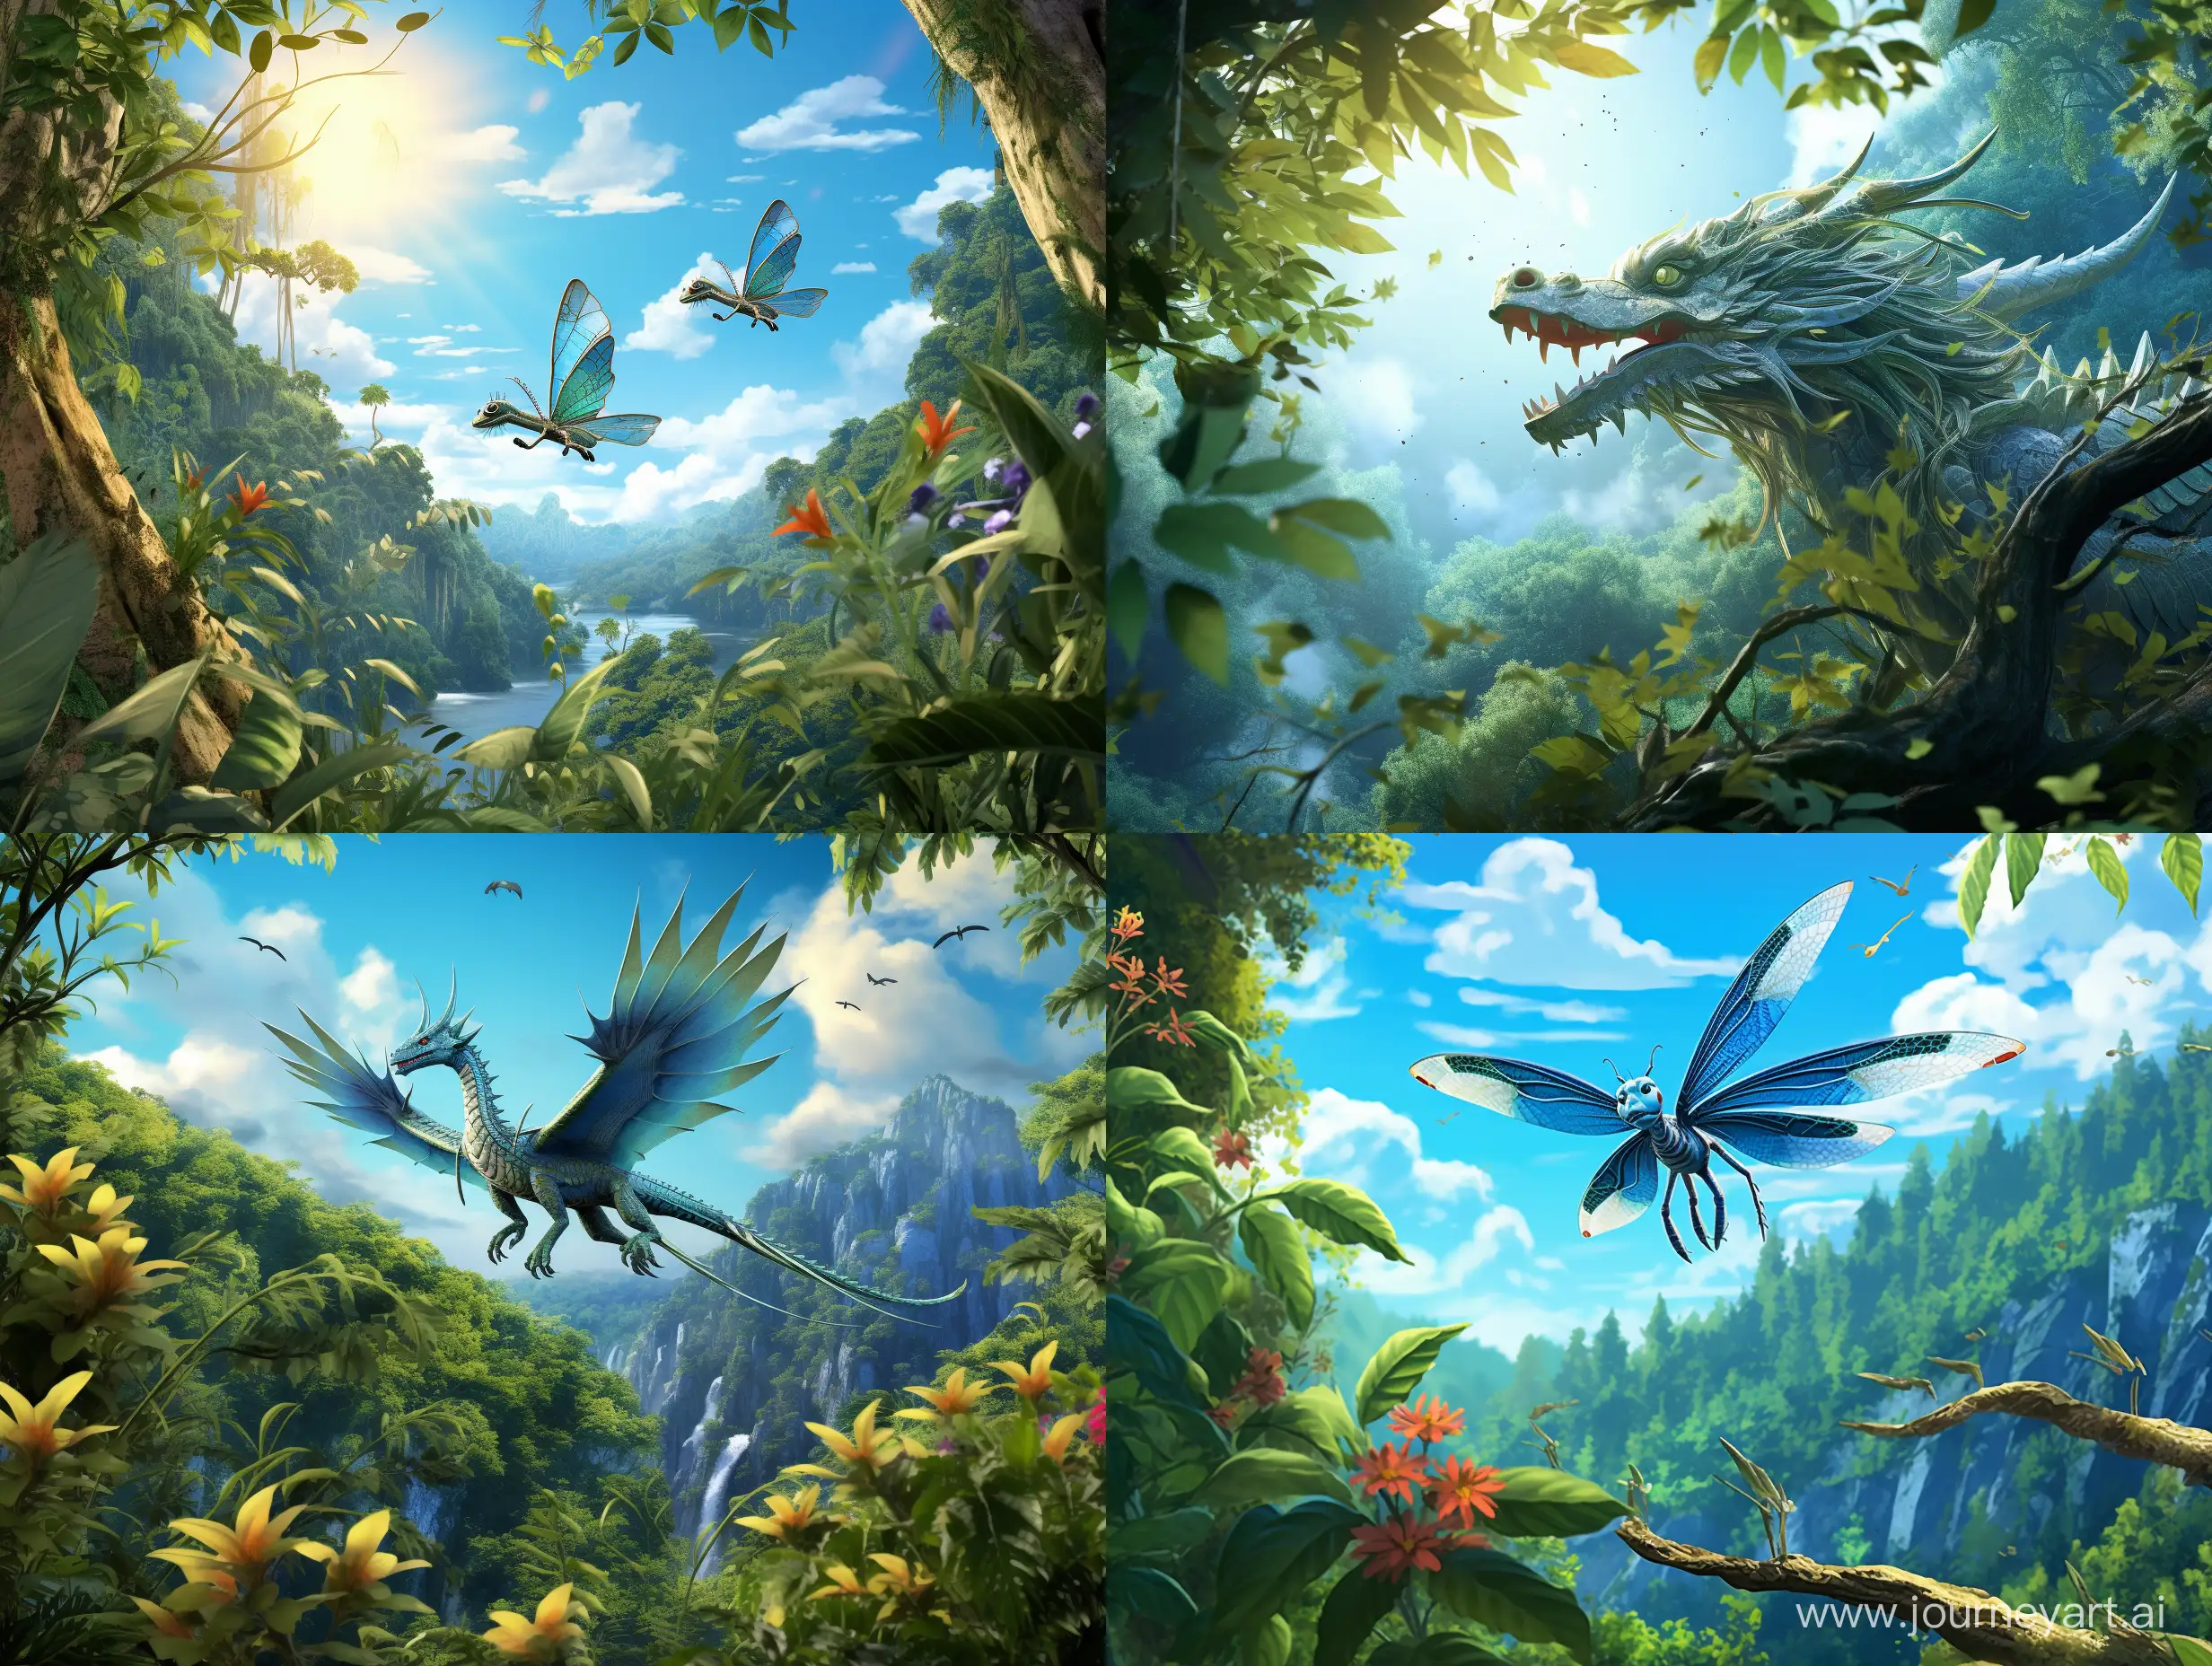 Majestic-Green-Chinese-Dragon-Soaring-Above-Enchanted-Forest